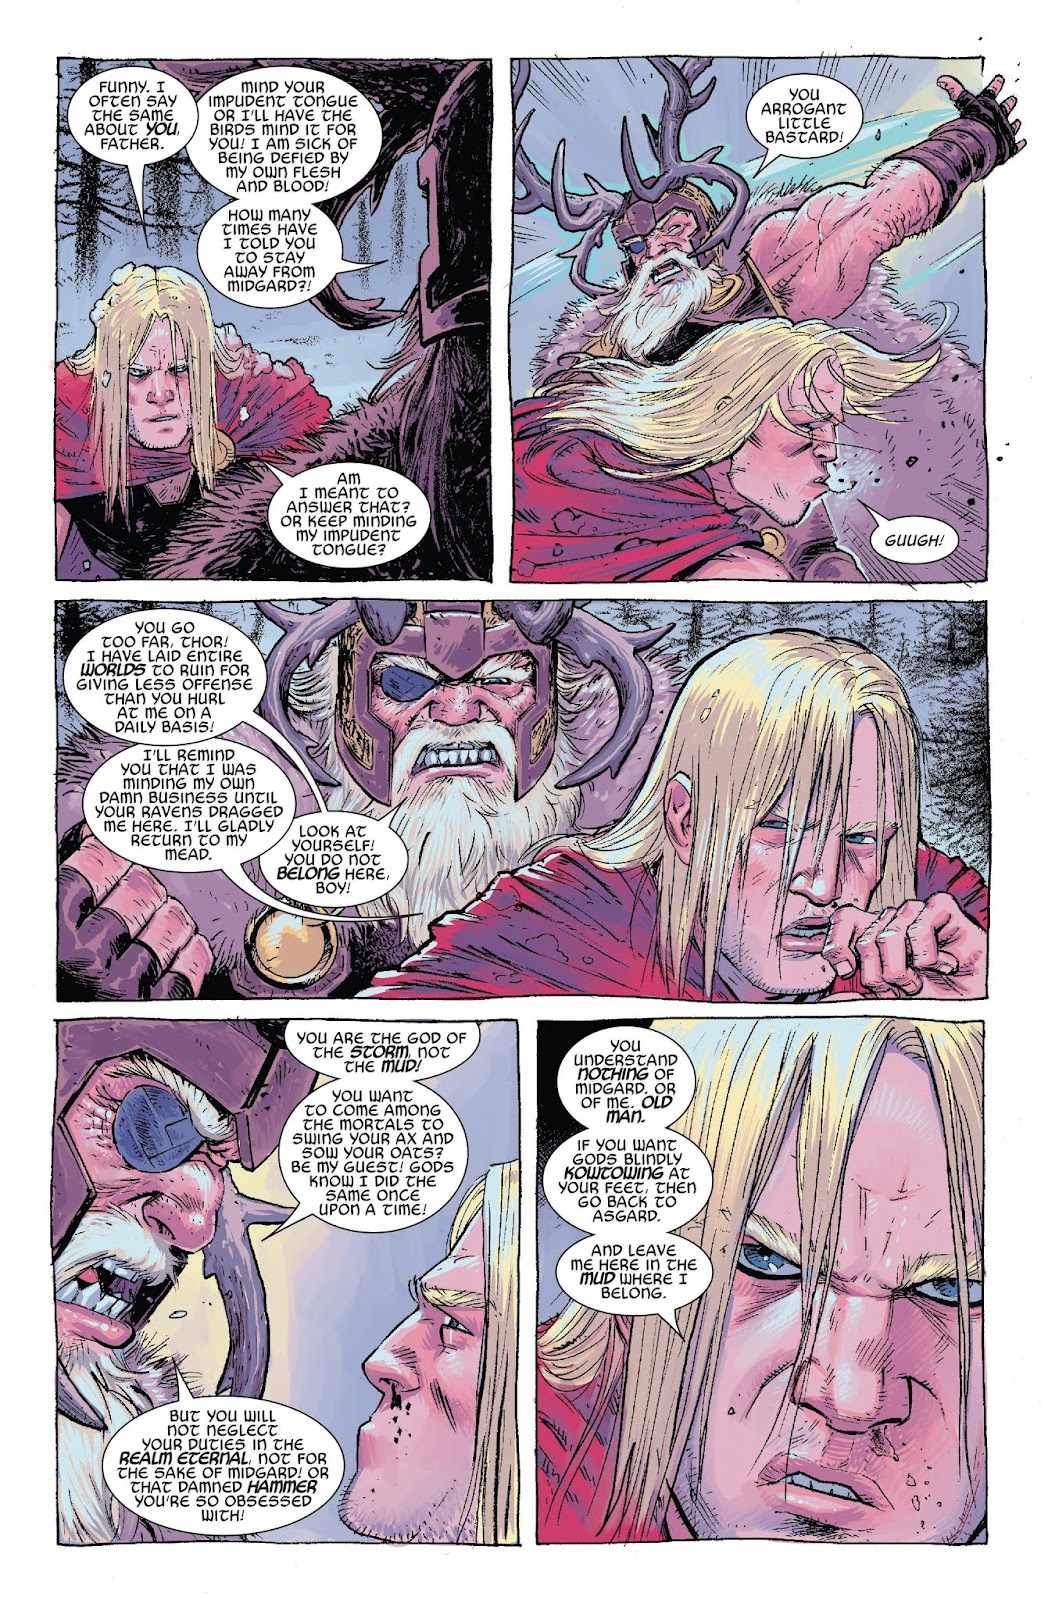 Thor 2018 Issue 7 | Read Thor 2018 Issue 7 comic online in high quality.  Read Full Comic online for free - Read comics online in high quality .